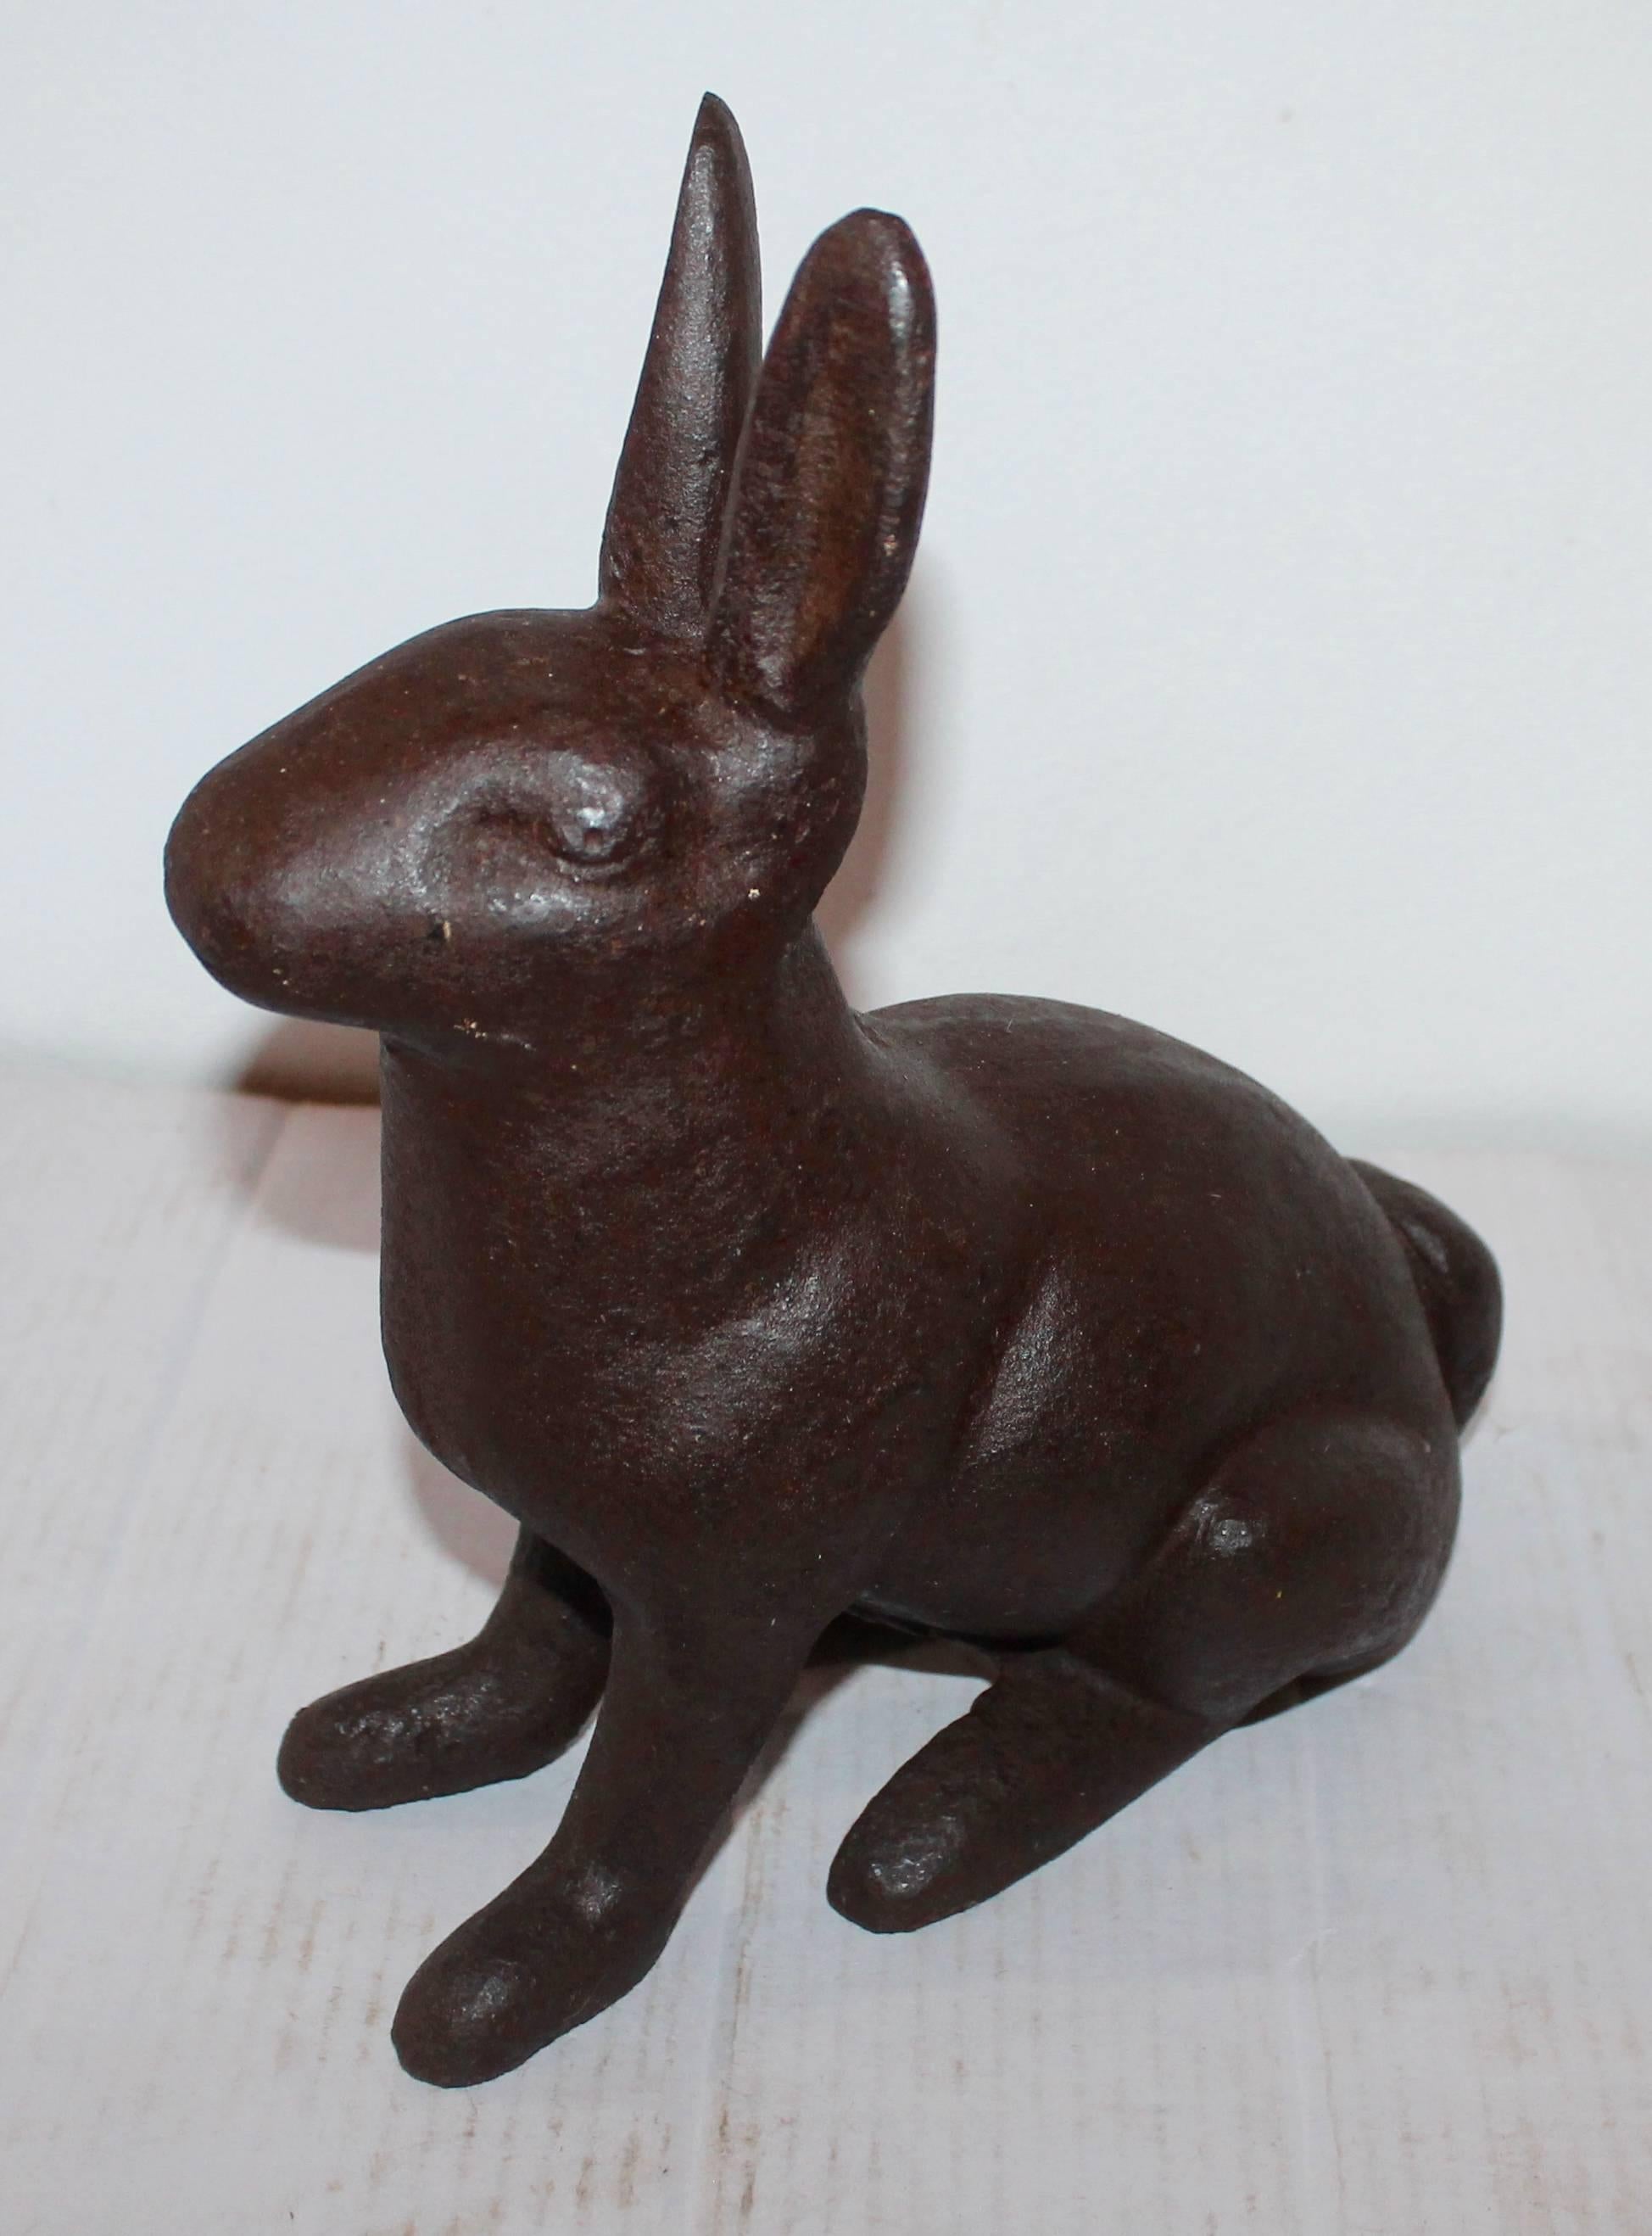 This cast iron bunny was on someones front porch steps! She is in very good condition and has a mellow aged patinead surface.